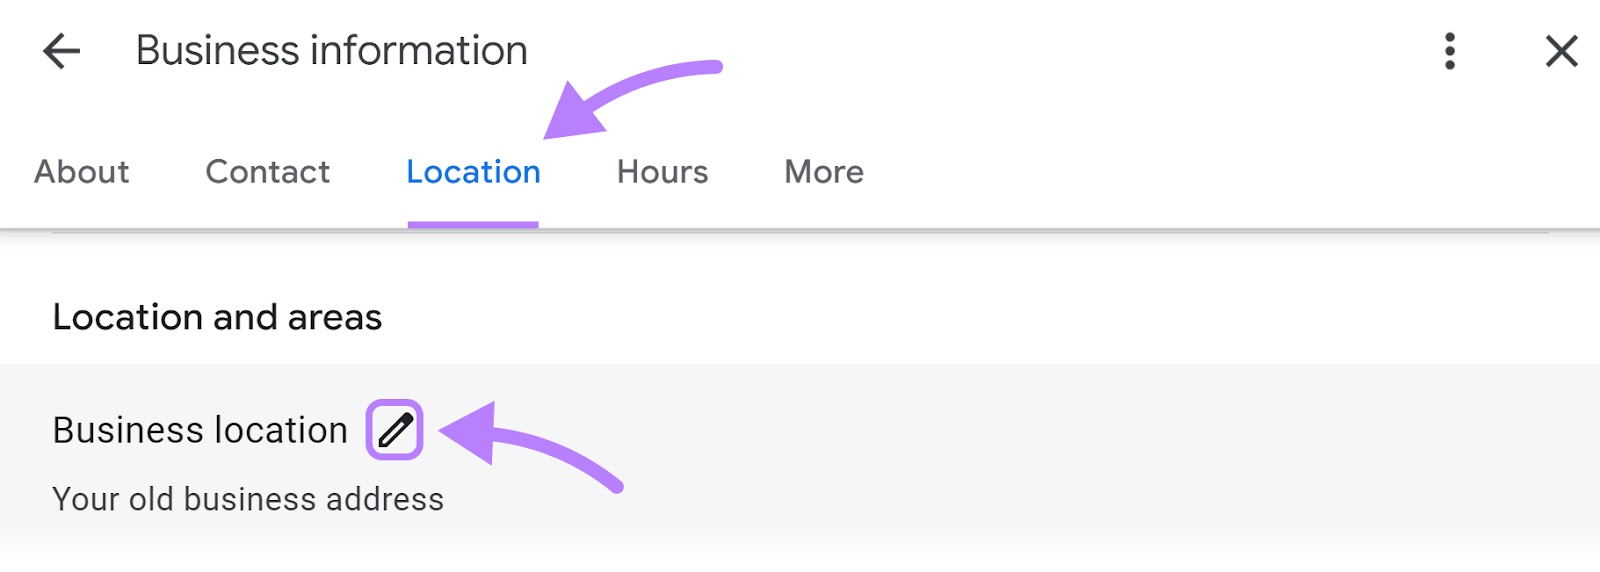 Pencil icon highlighted next to "Business location" field